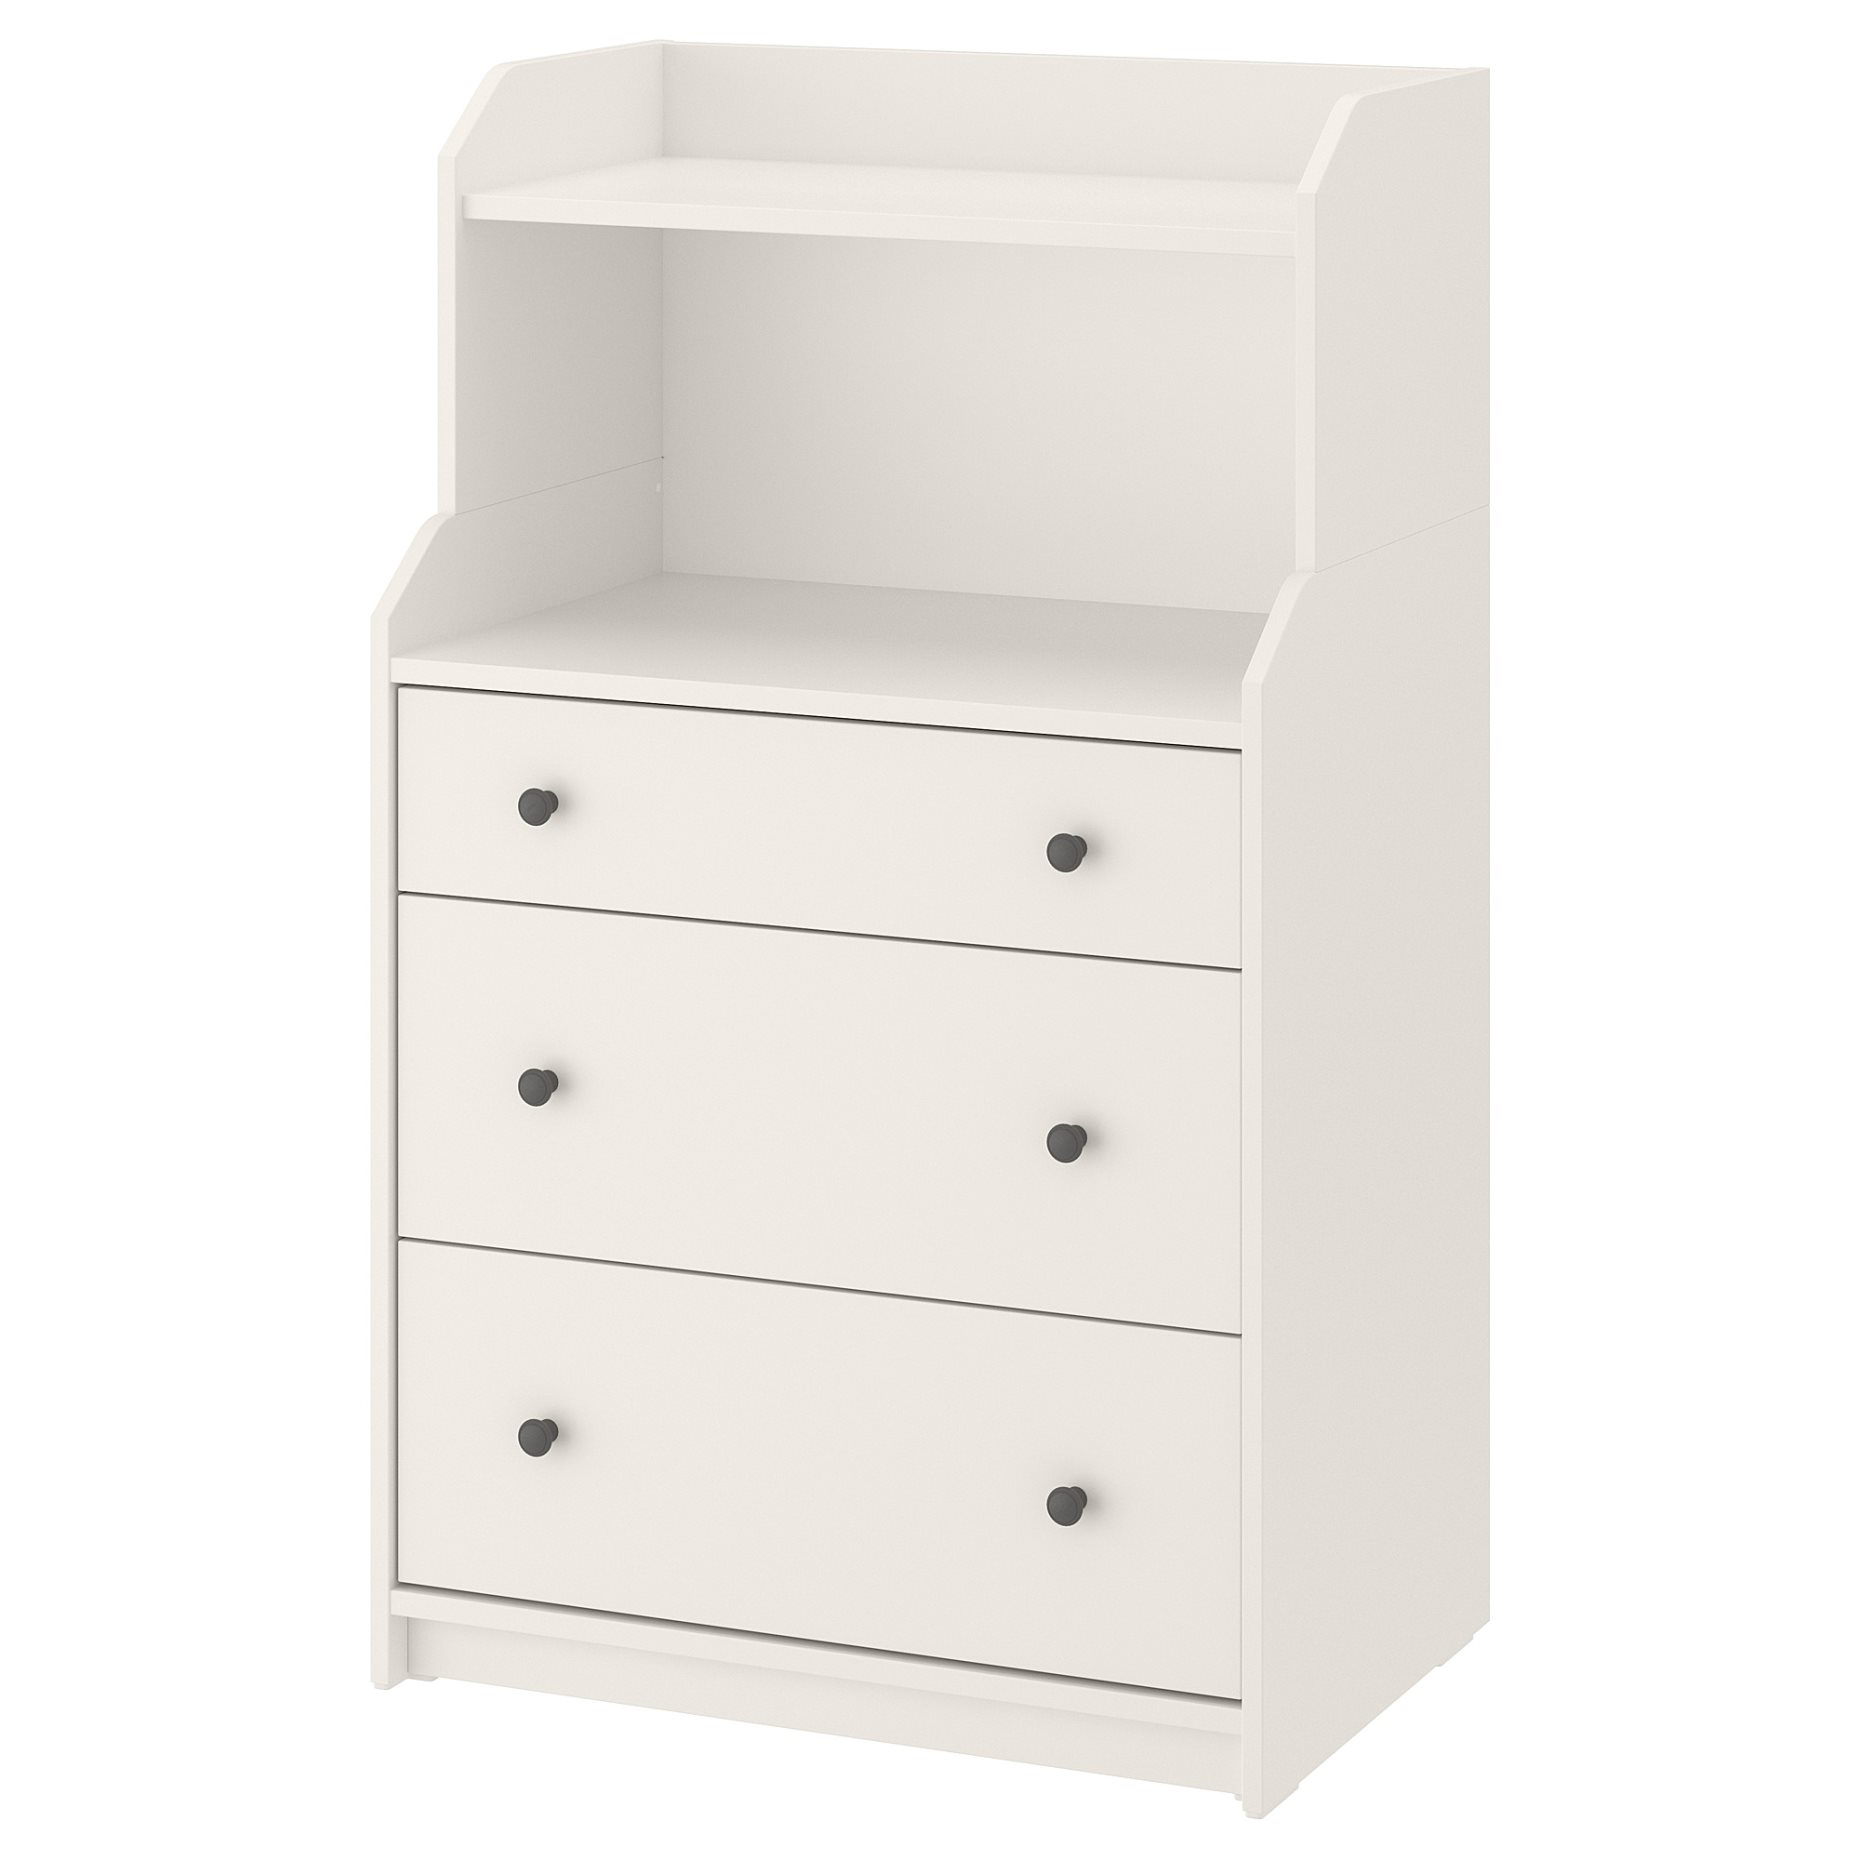 HAUGA, chest of 3 drawers with shelf,70x116 cm, 504.026.41